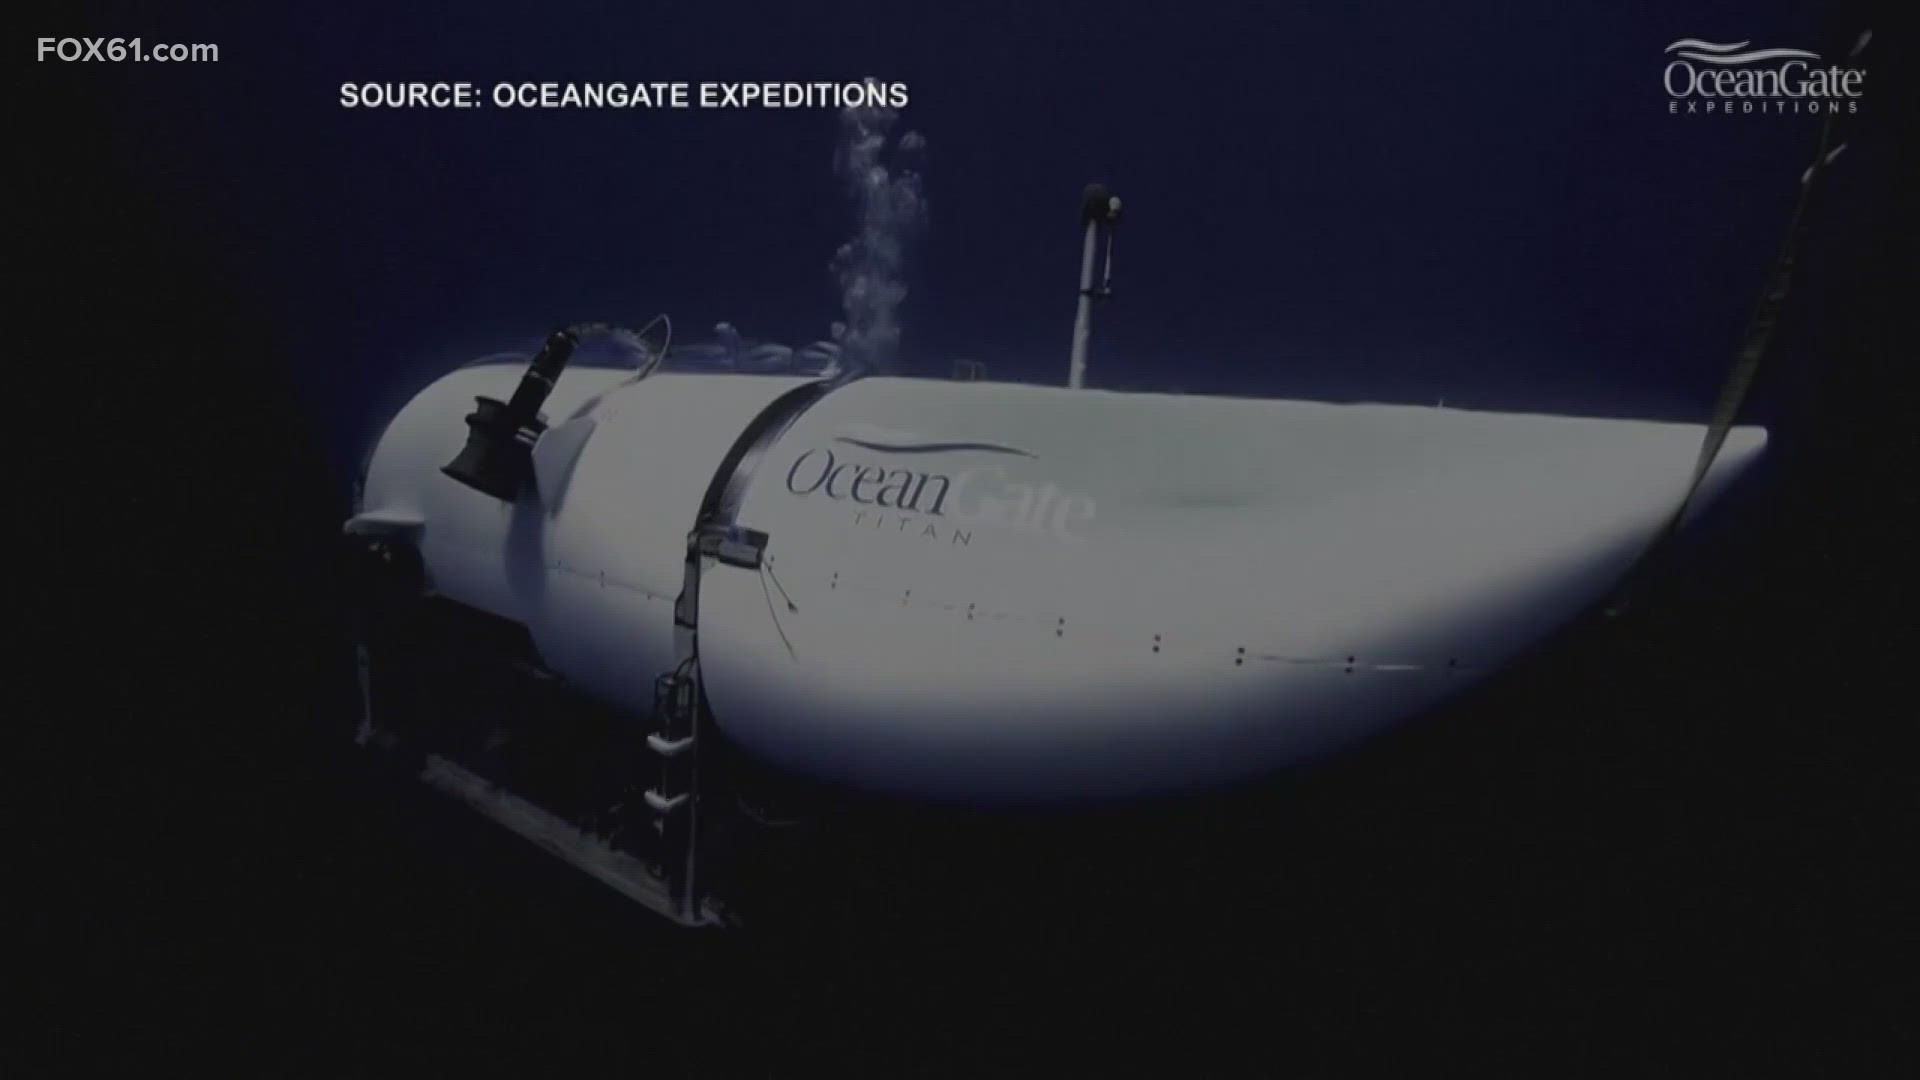 U.S. Coast Guard officials said Tuesday search efforts for the Titan submersible have not yielded any results.